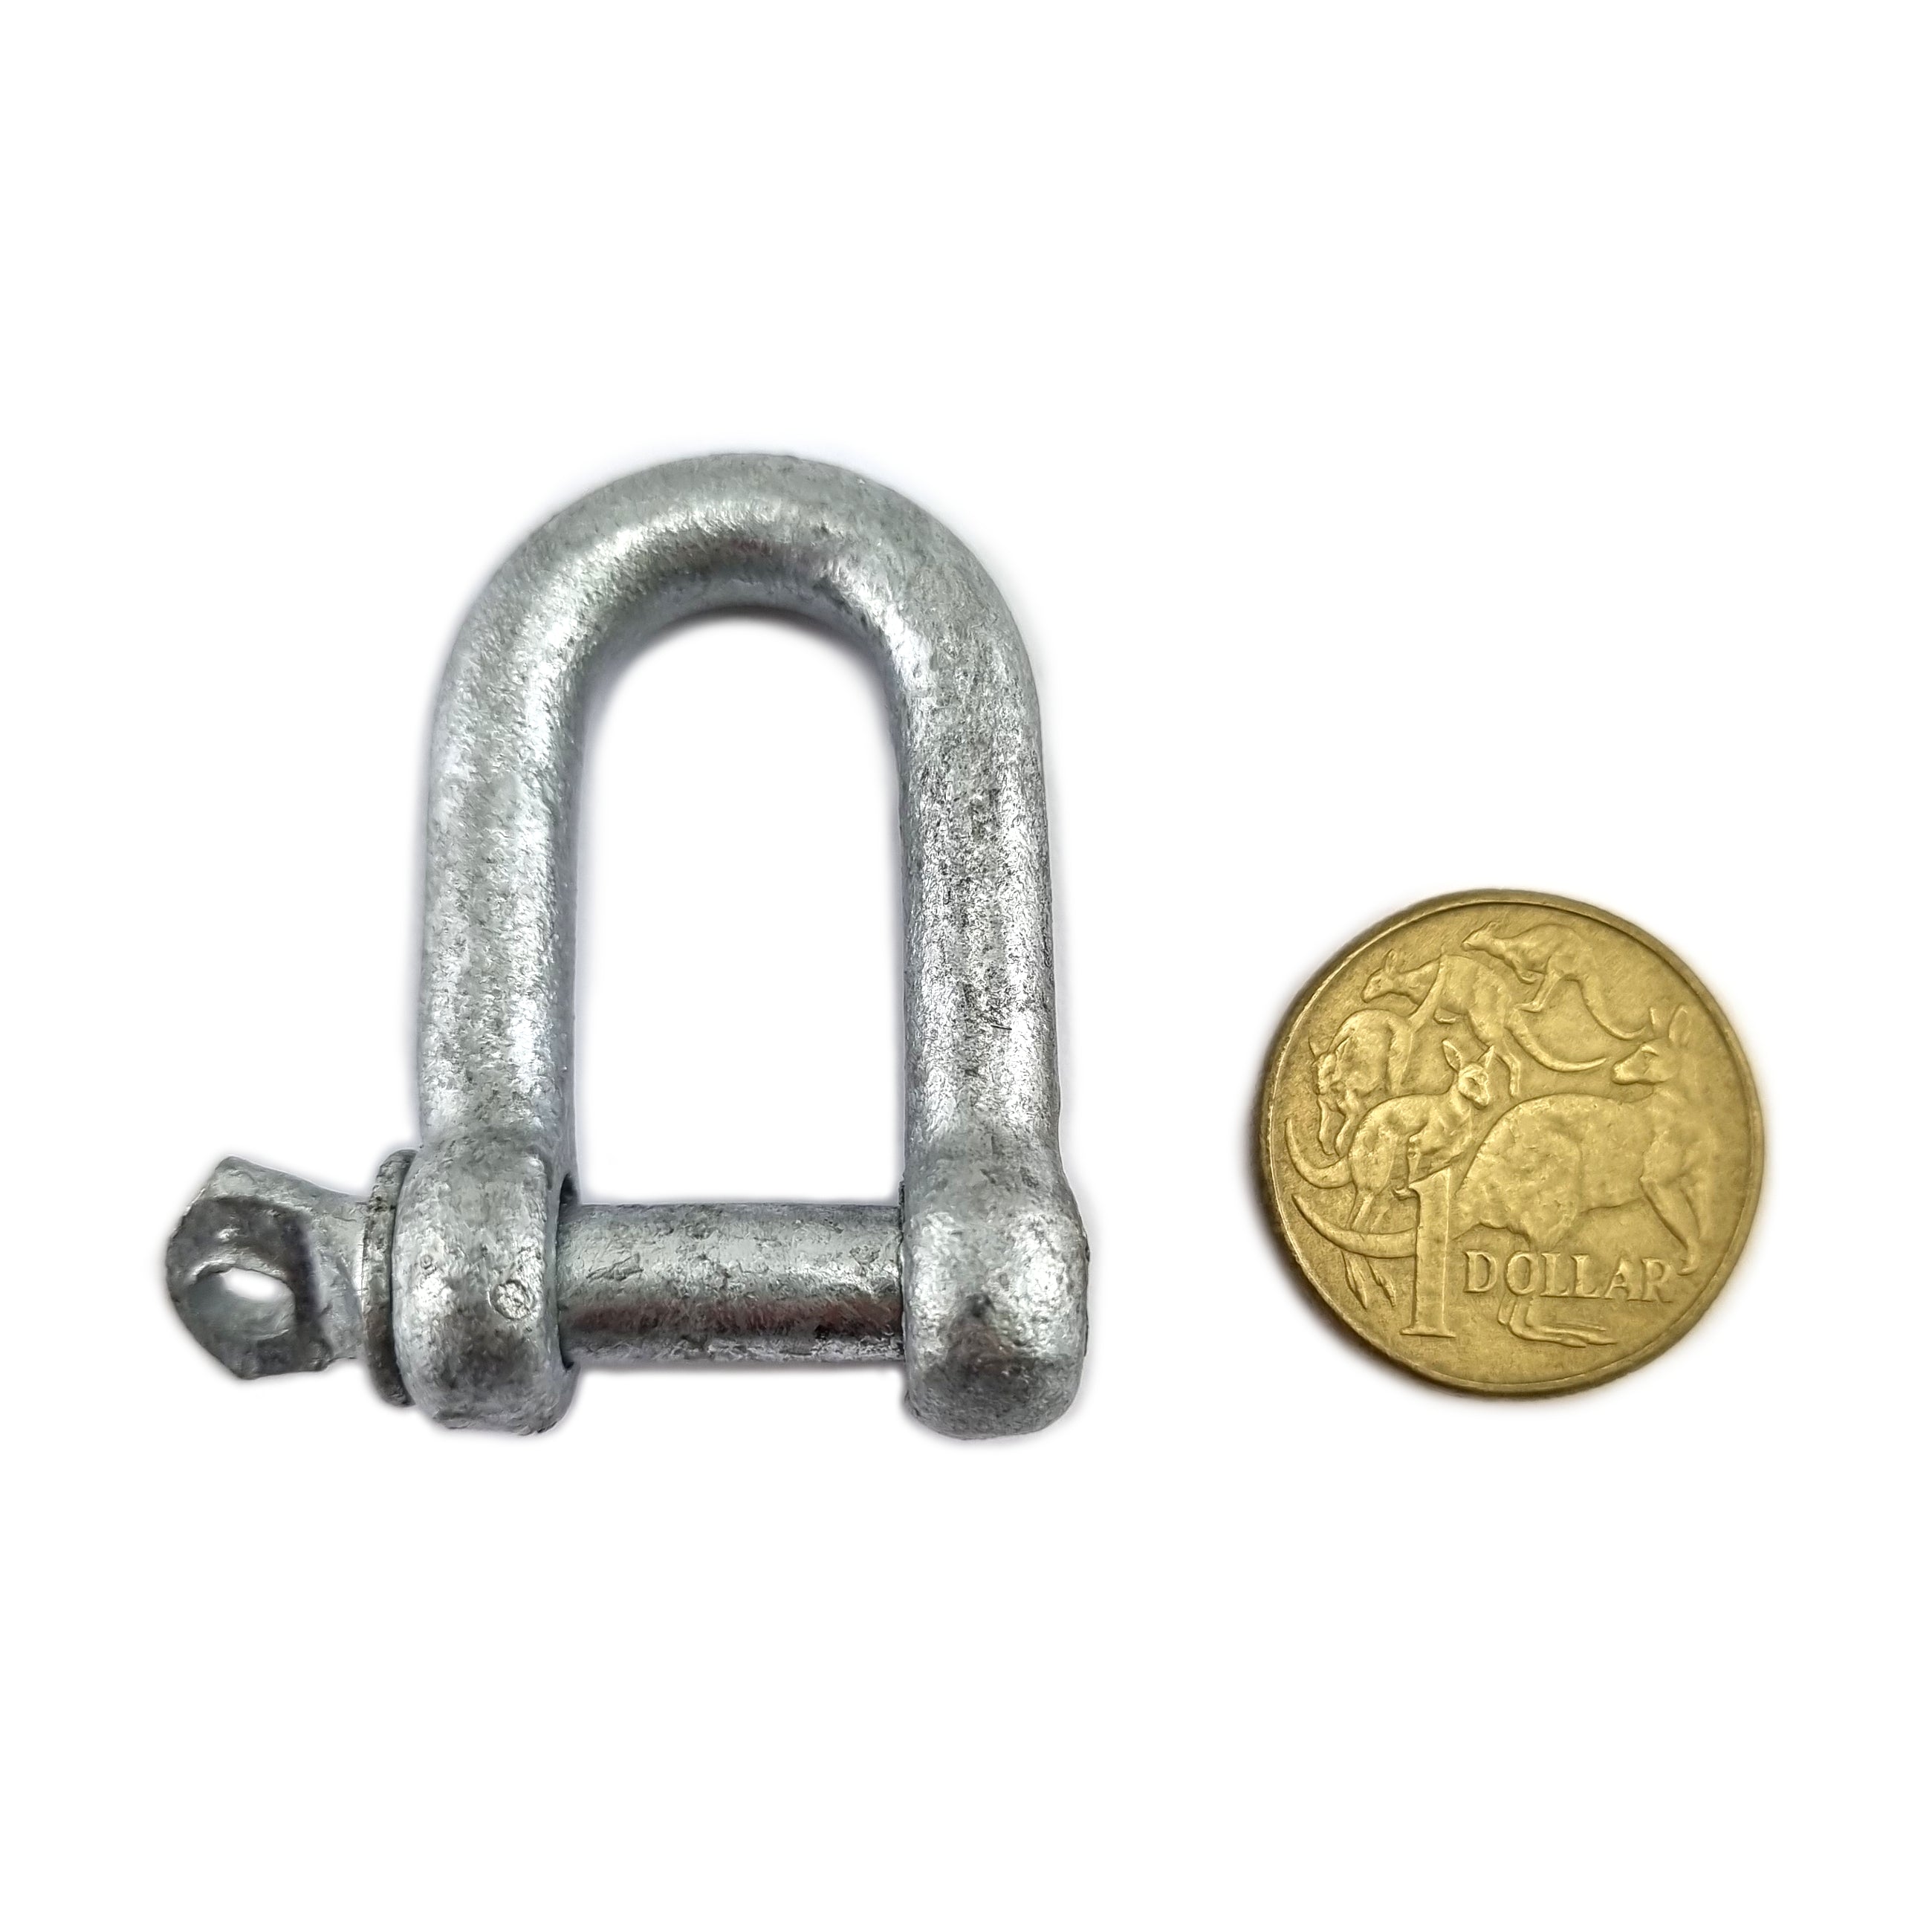 8mm Galvanised D Shackle. Shop D-Shackles and Hardware online at factory direct prices. Shipping Australia wide or Melbourne pick-up